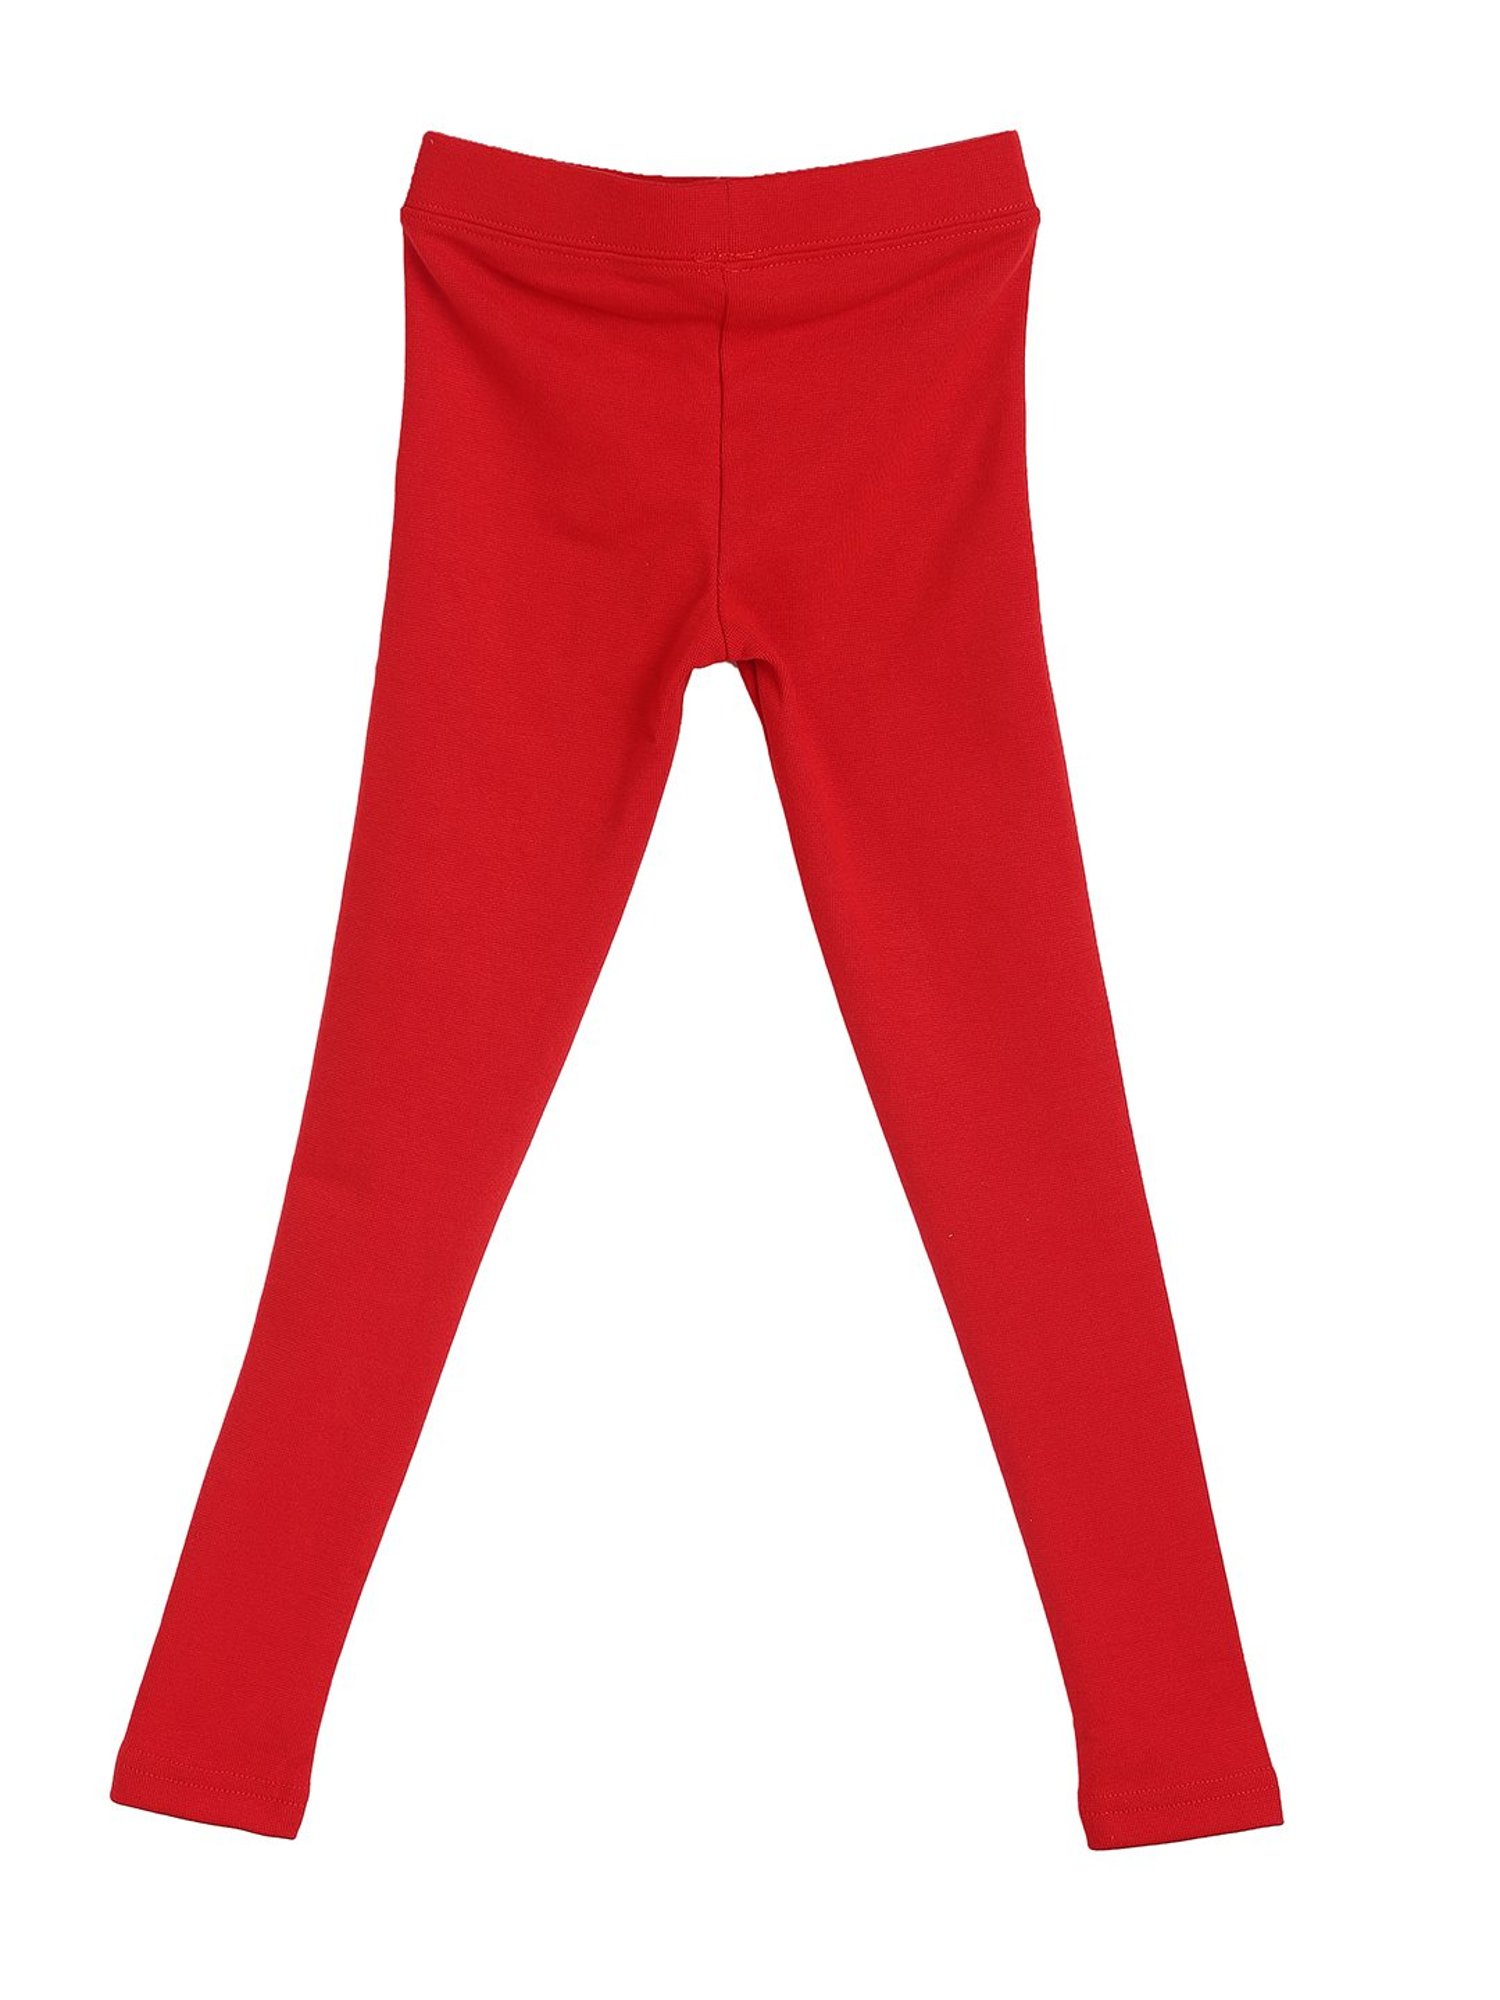 Buy 612 League Kids Red Solid Leggings for Girls Clothing Online @ Tata CLiQ